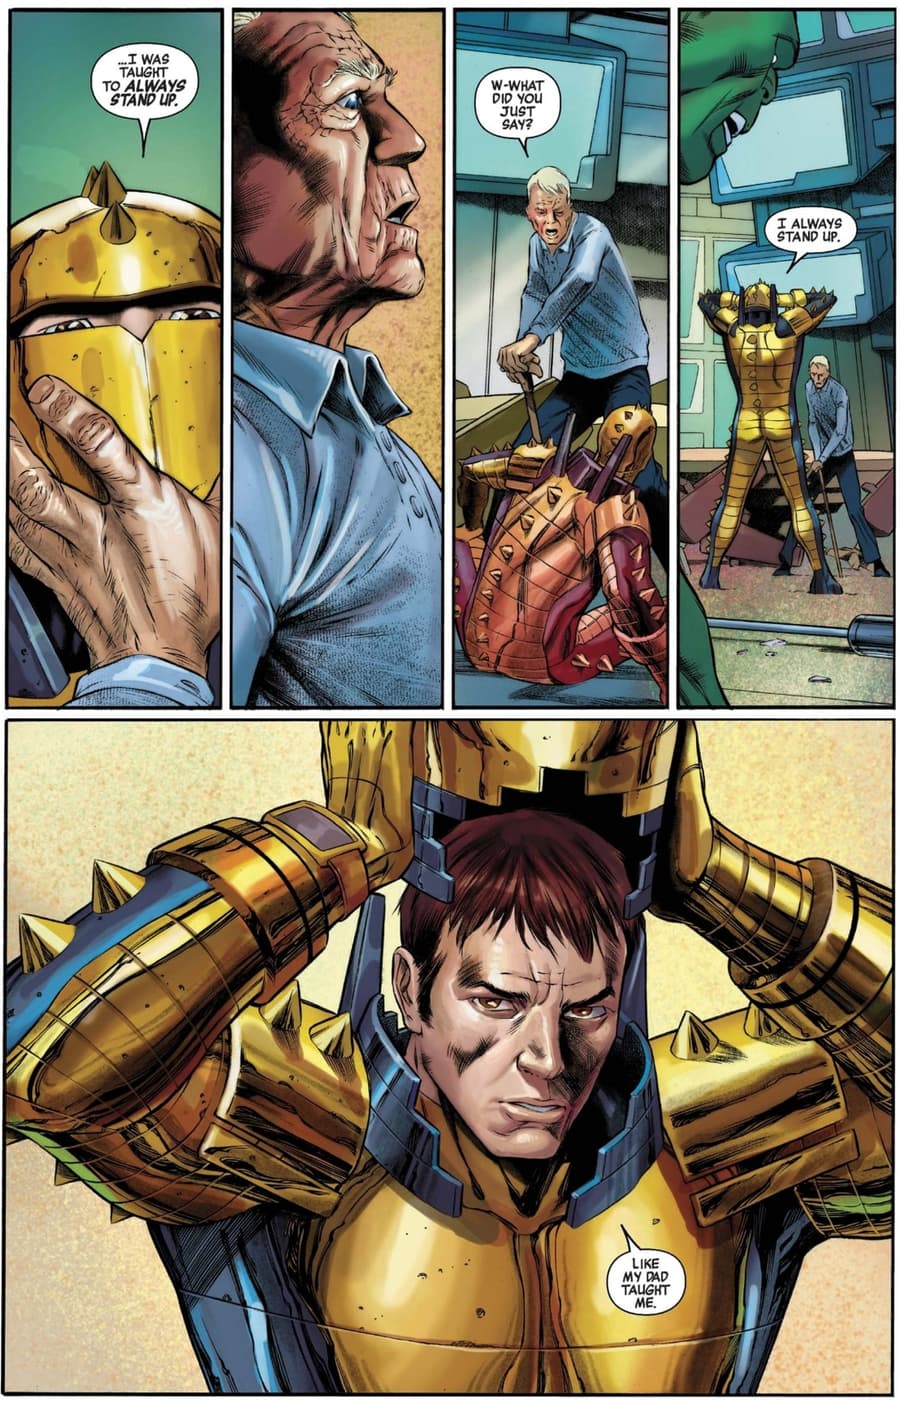 CAPTAIN AMERICA (2012) #23 panel by Rick Remender and Carlos Pacheco